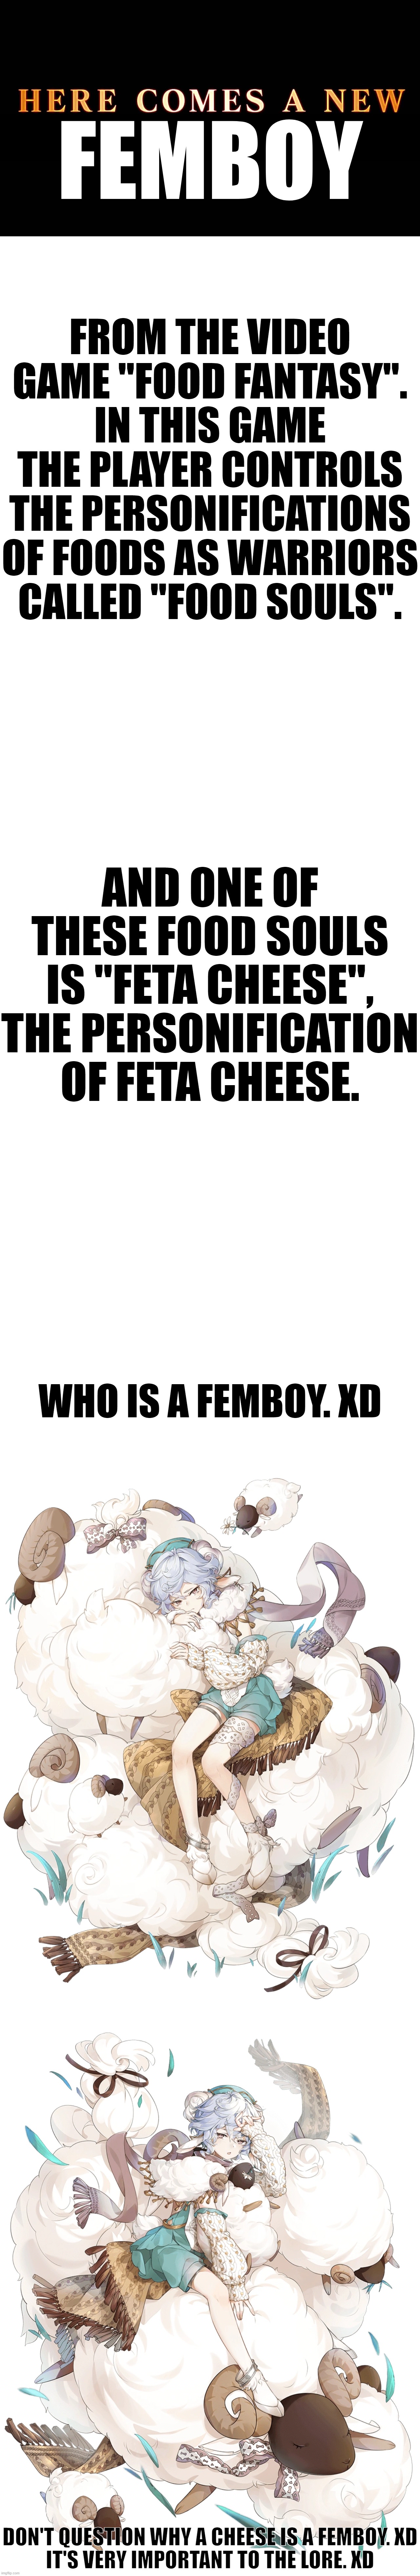 It's essential to the lore! xD | FEMBOY; FROM THE VIDEO GAME "FOOD FANTASY".
IN THIS GAME THE PLAYER CONTROLS THE PERSONIFICATIONS OF FOODS AS WARRIORS CALLED "FOOD SOULS". AND ONE OF THESE FOOD SOULS IS "FETA CHEESE", THE PERSONIFICATION OF FETA CHEESE. WHO IS A FEMBOY. XD; DON'T QUESTION WHY A CHEESE IS A FEMBOY. XD
IT'S VERY IMPORTANT TO THE LORE. XD | image tagged in food fantasy,feta cheese | made w/ Imgflip meme maker